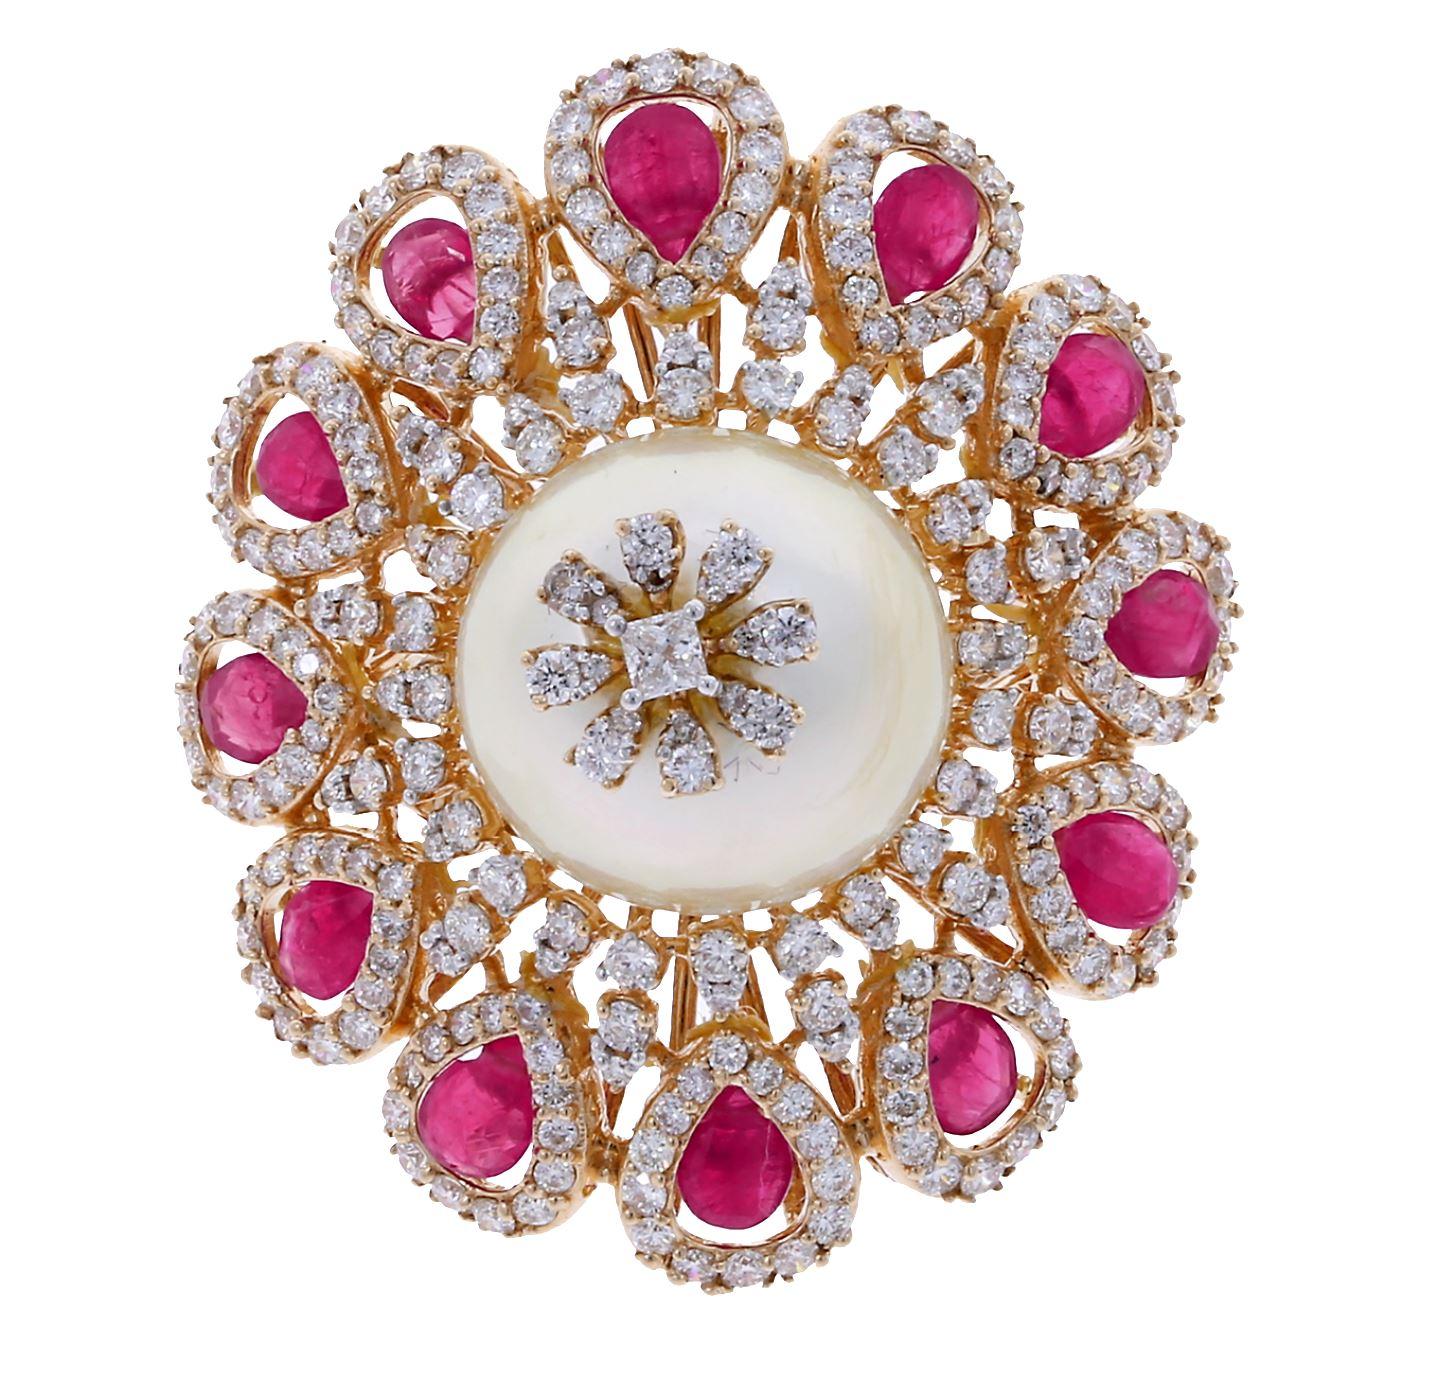 A bold, high-dome cocktail ring consisting of a large 18 ct. Pearl elevated in the center, accented with Diamonds on the surface and all around, with ruby petals circling the bottom. Diamonds (2.03 cts), Ruby (2.05 cts). 18K Yellow Gold.